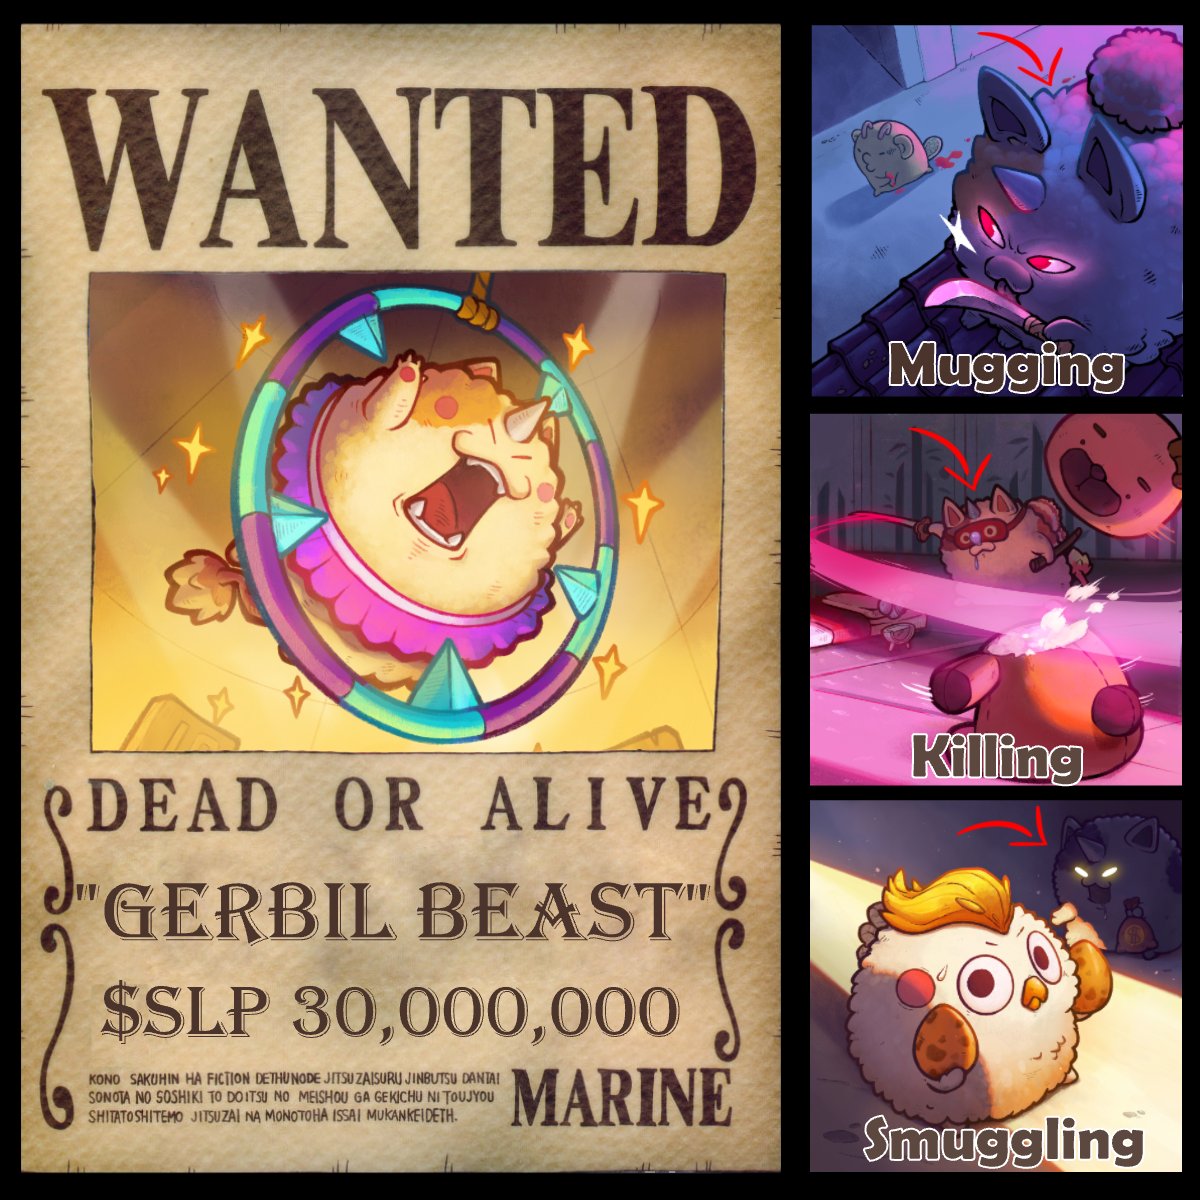 RT ExtrangHeroAxie: WANTED!! "GERBIL BEAST" 👀  Gerbil Beast could be Lunacias public enemy No.1 with the activities he's been doing.. Mugging 👊, Killing ⚔️, Smuggling 💰  @Jihoz_Axie @Smooch_Axie @Masamune_Axie @nixeniego why do Beast Axies tend to be very troublesome? @ArcoBeast is another one 😂 [twitter.com] [pbs.twimg.com]